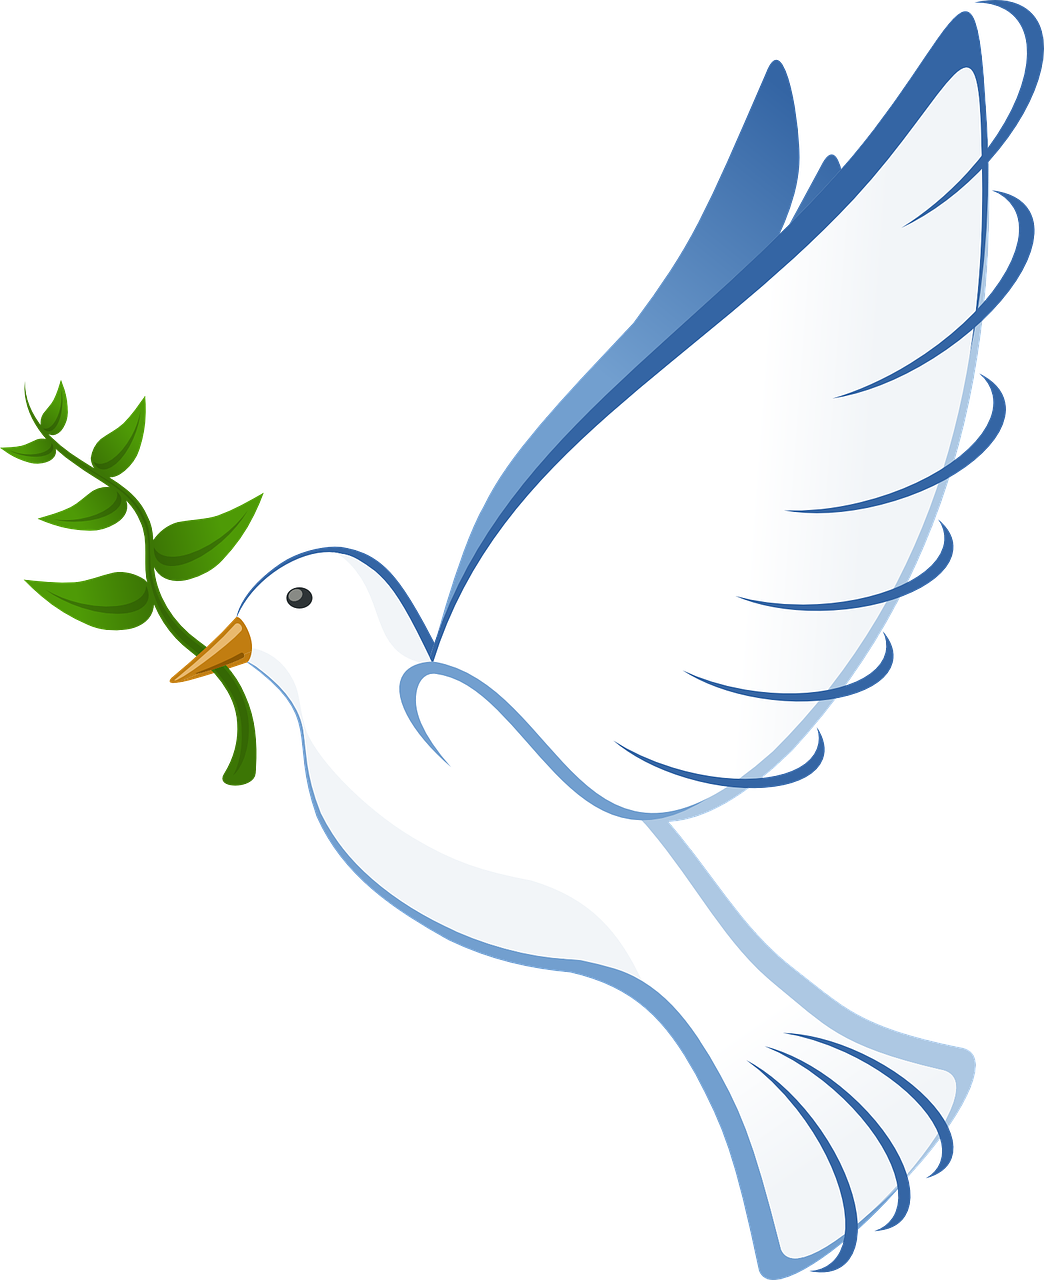 dove,flying,peace,olive,branch,symbol,pigeon,wings,isolated,free vector graphics,free pictures, free photos, free images, royalty free, free illustrations, public domain